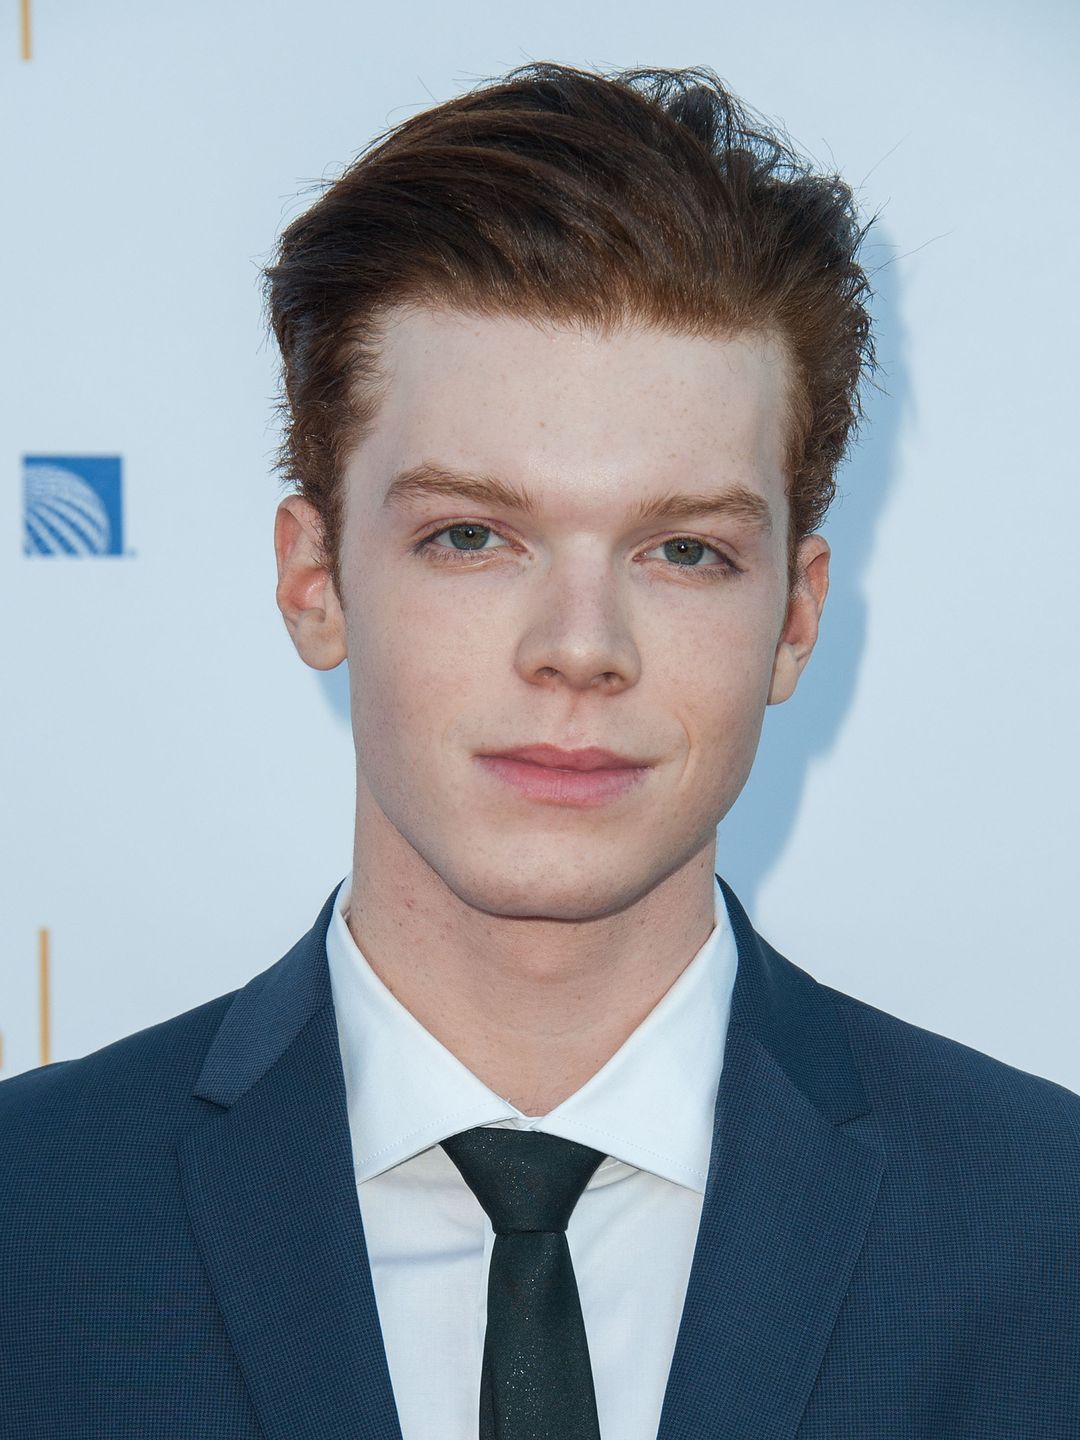 Cameron Monaghan who is his father